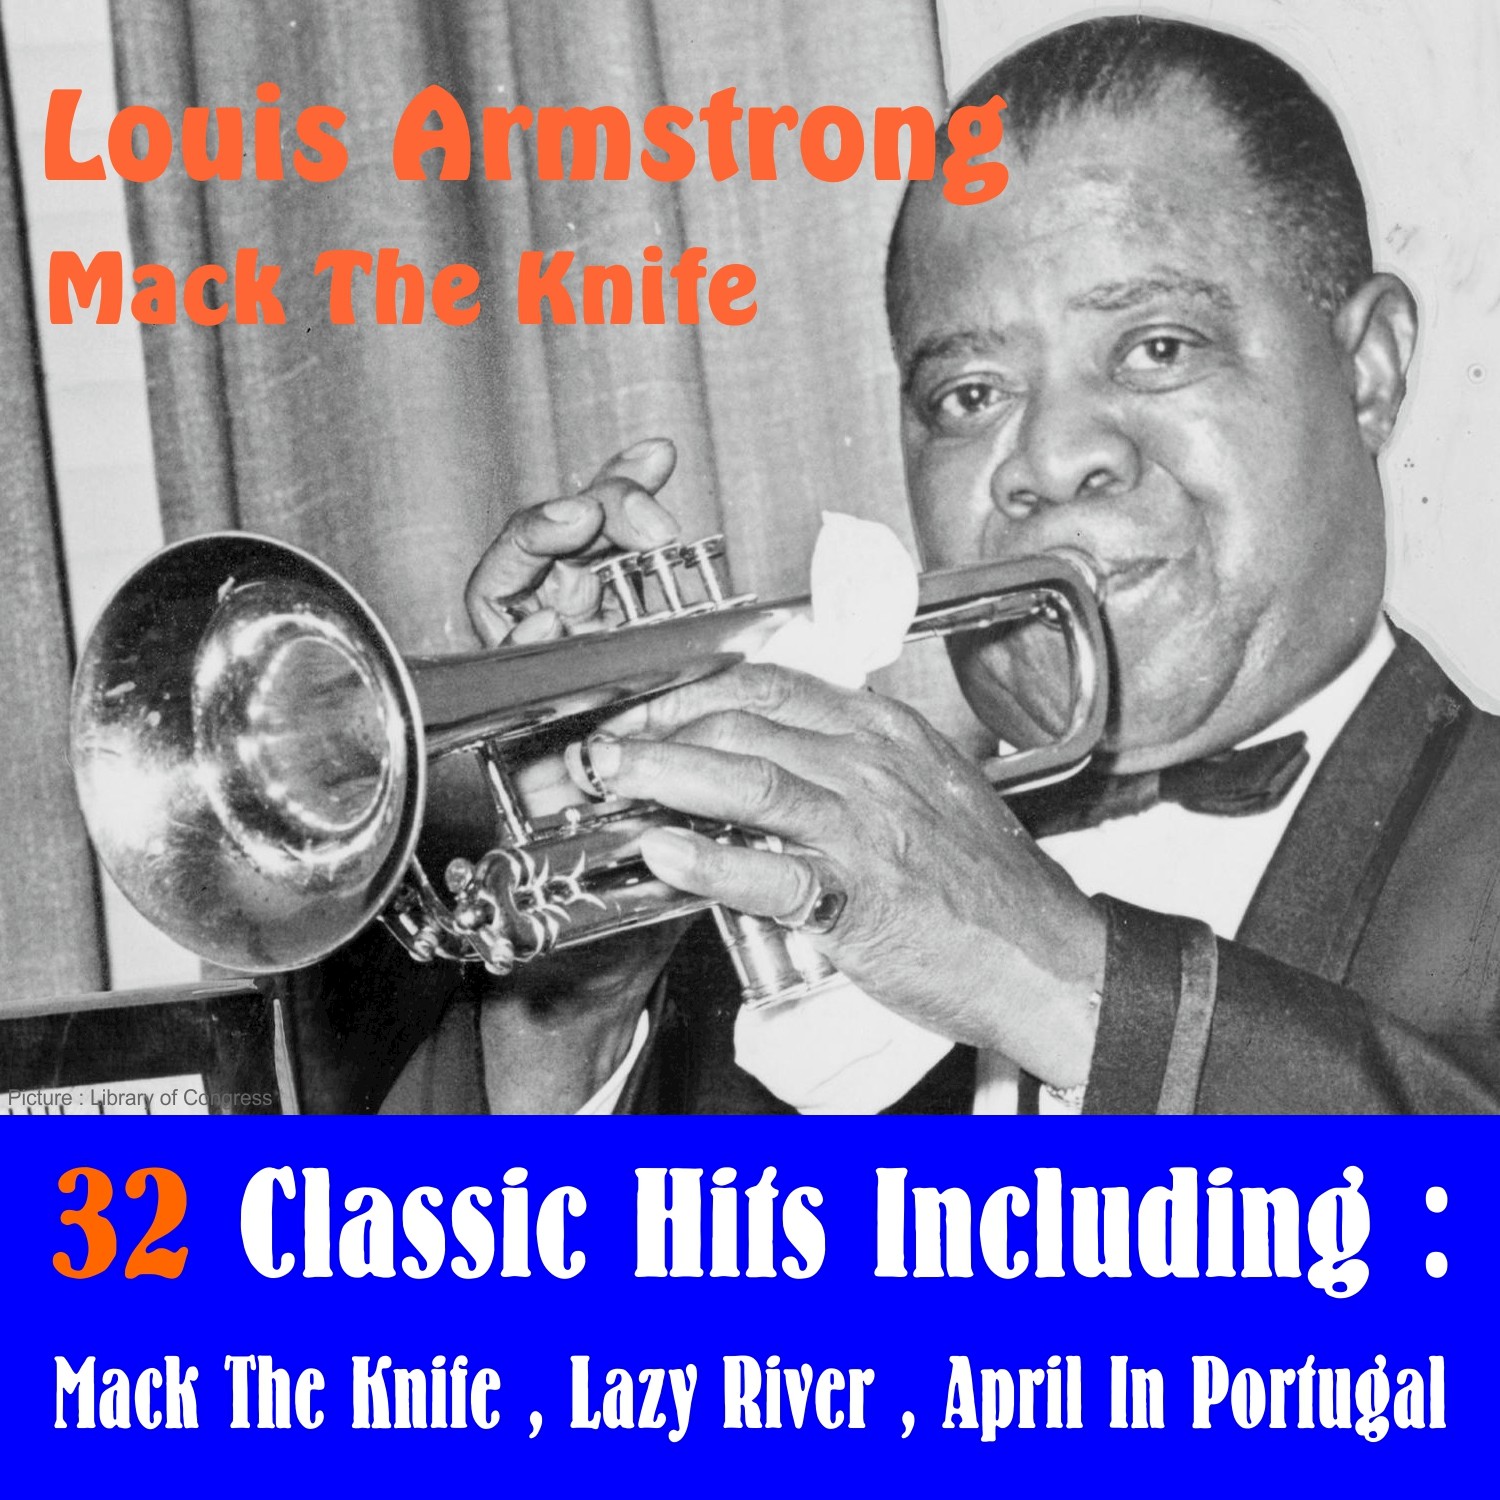 Louis Armstrong - Mack the Knife (32 Classic Hits)